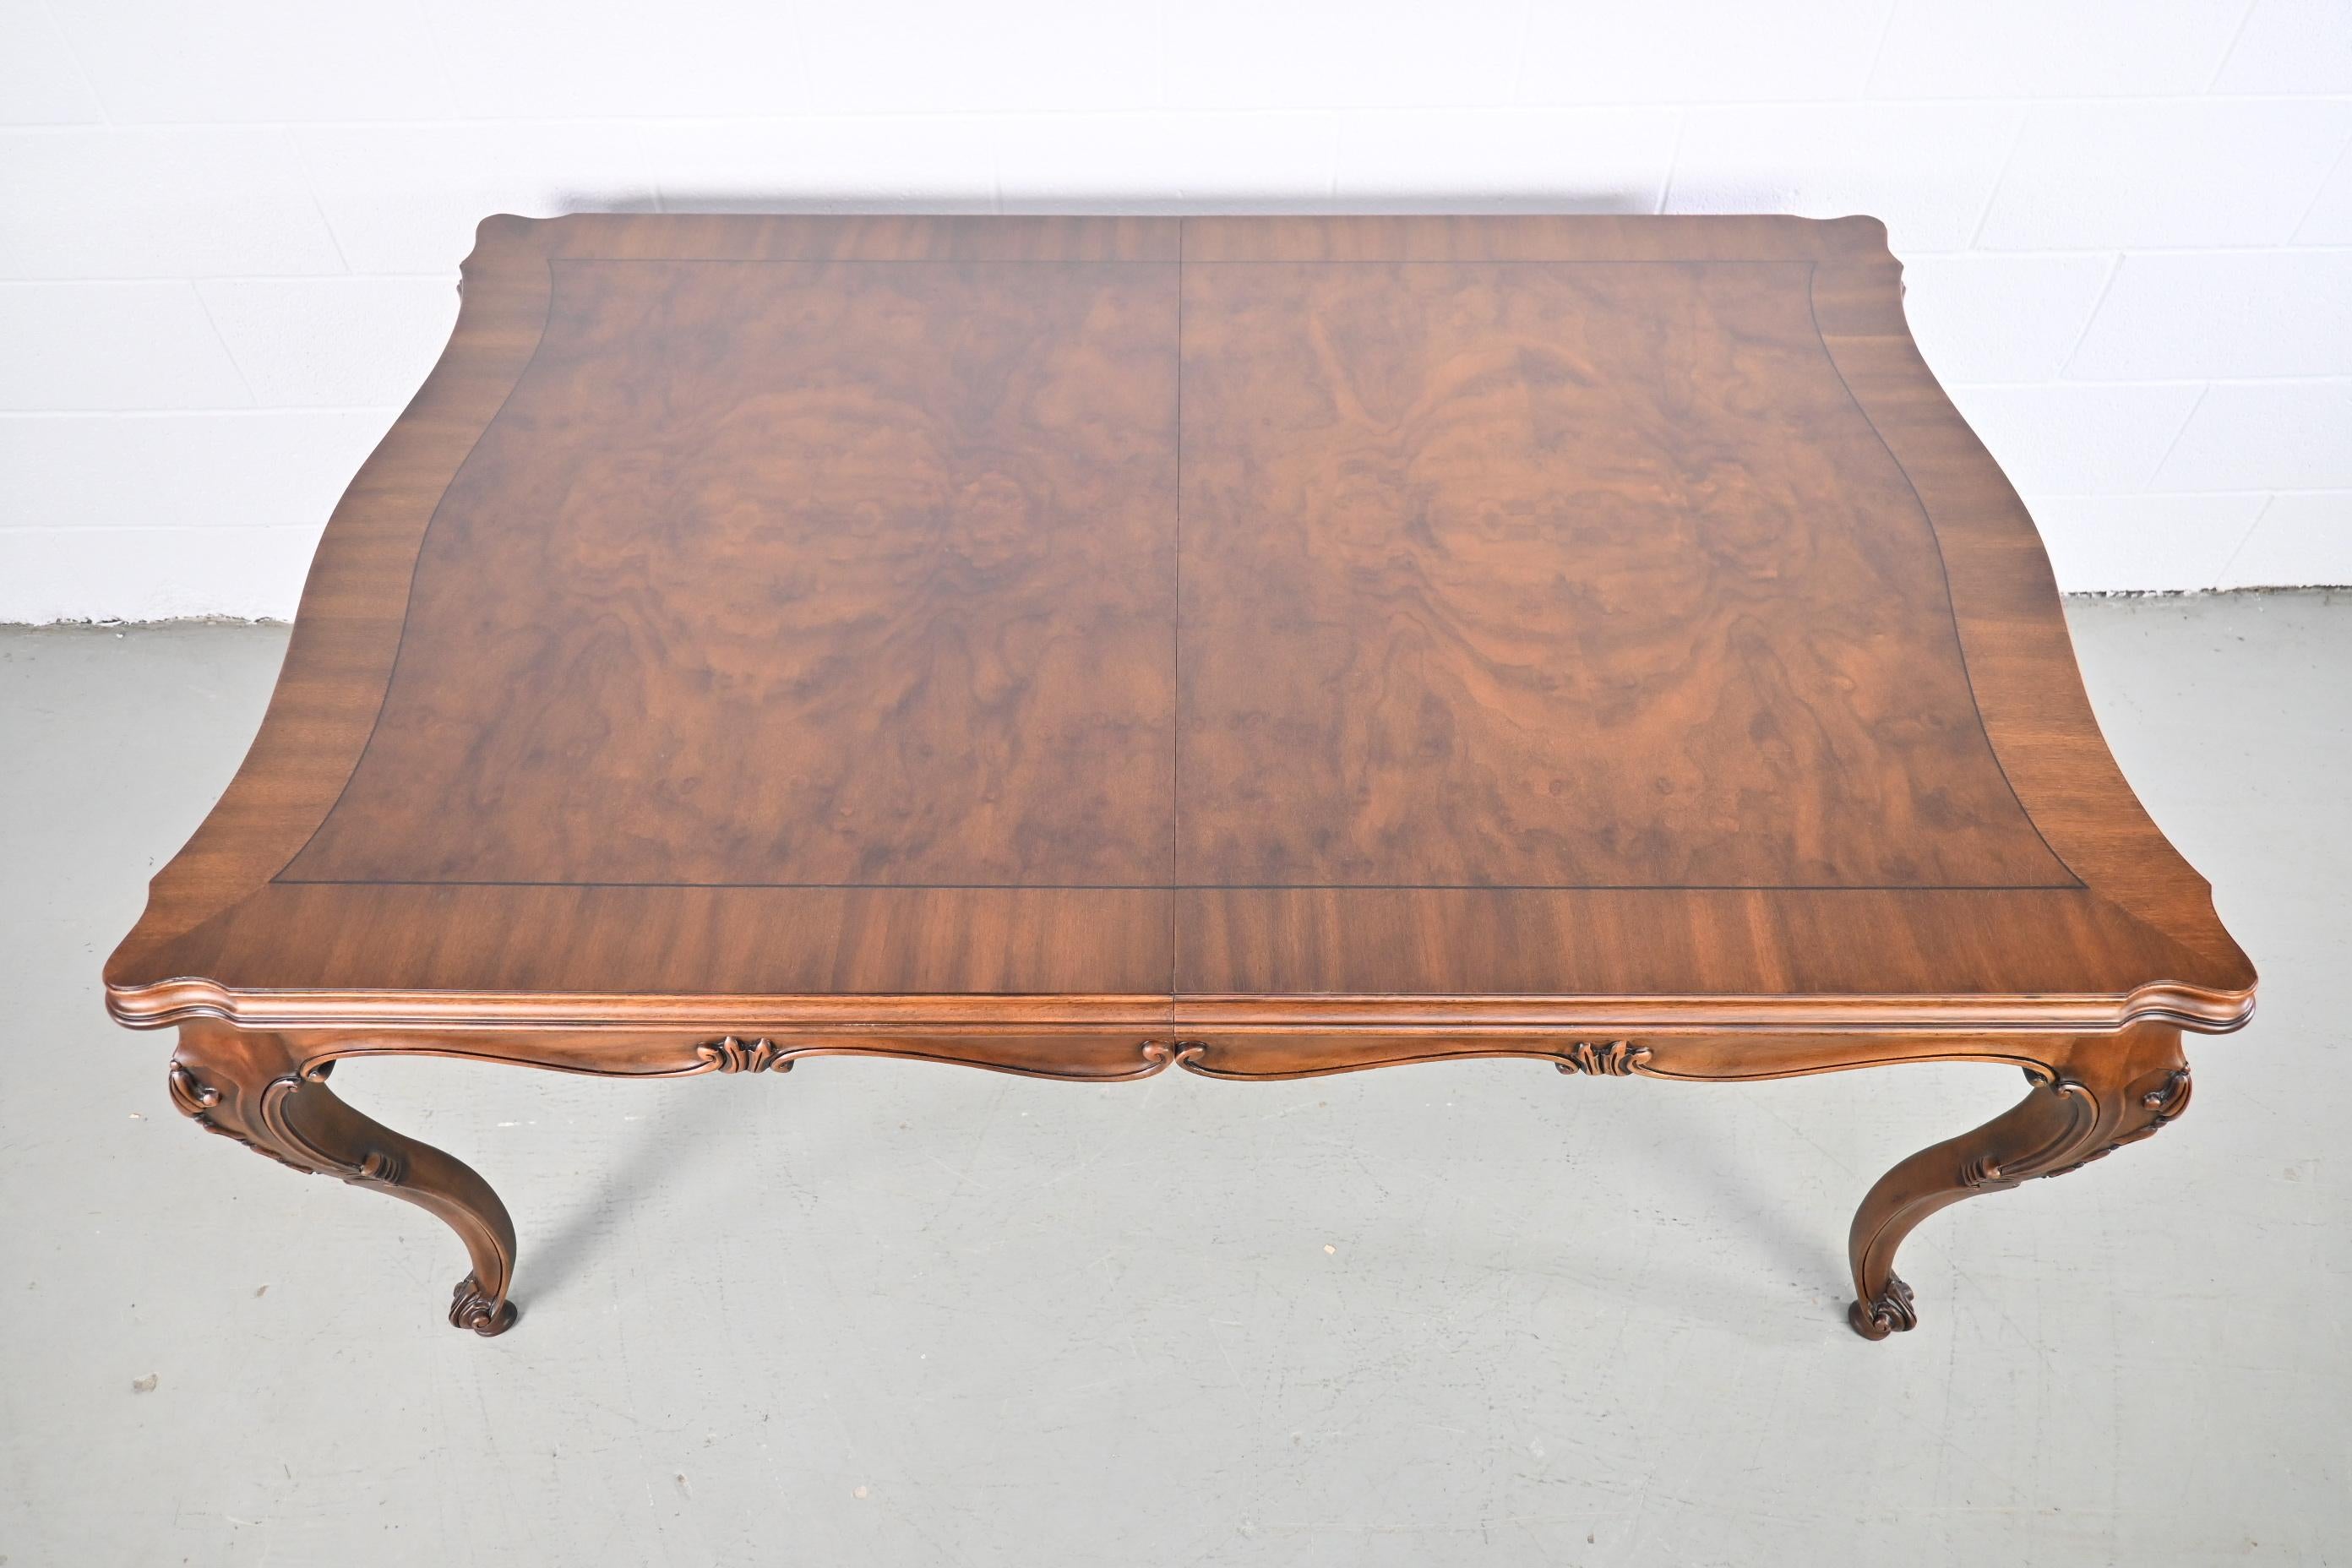 Walnut Karges Furniture Louis XV French Provincial Style Extension Dining Table